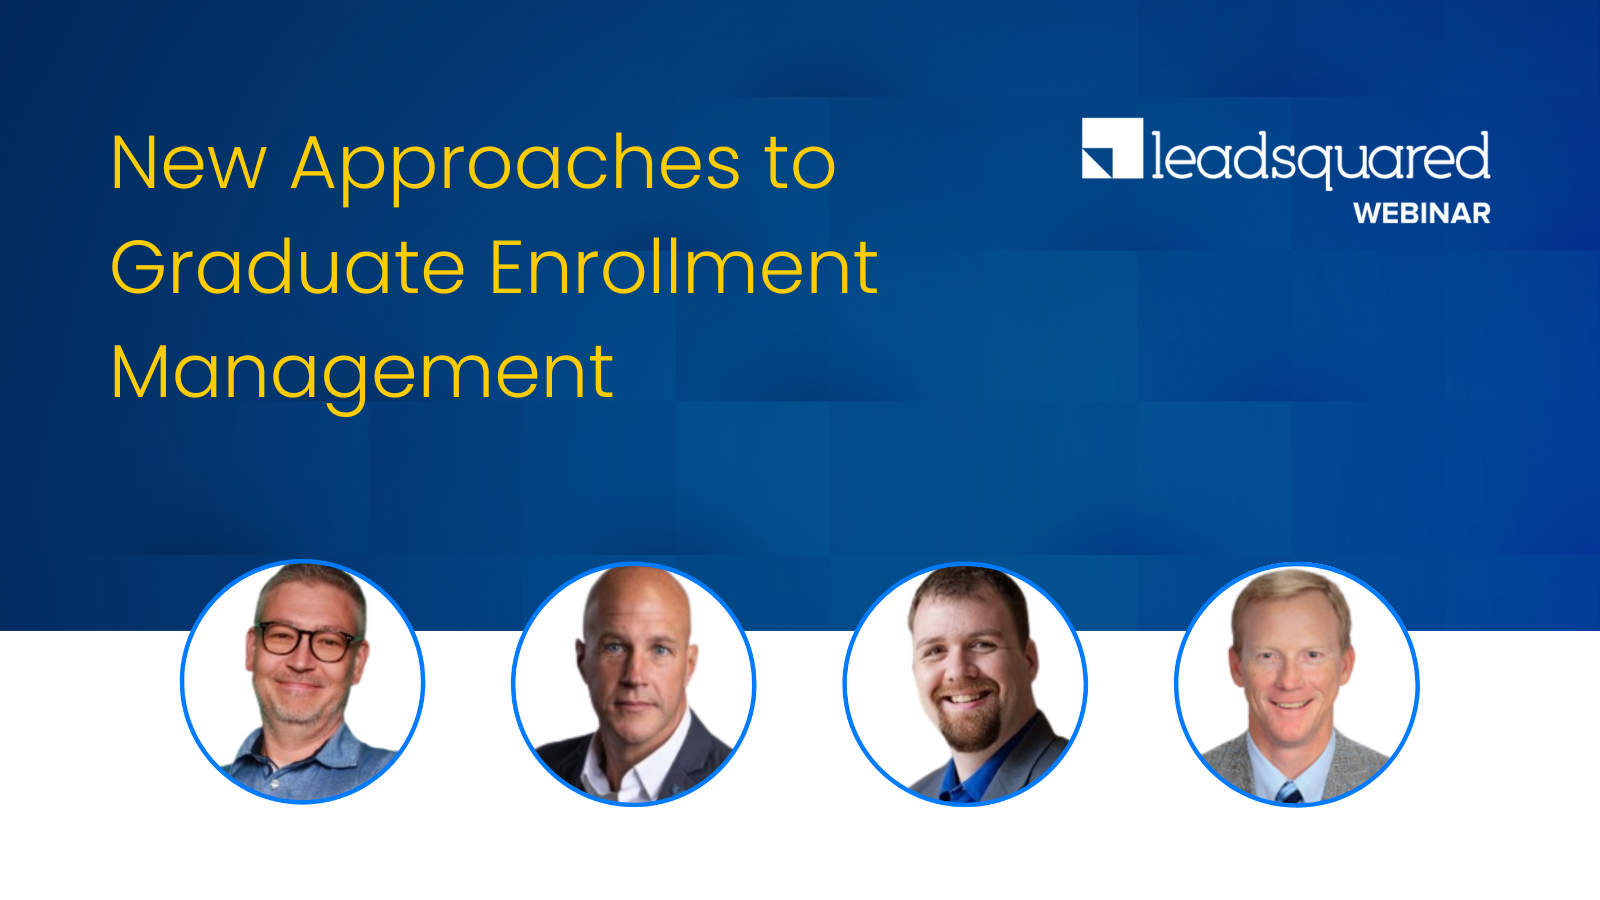 New Approaches to Graduate Enrollment Management